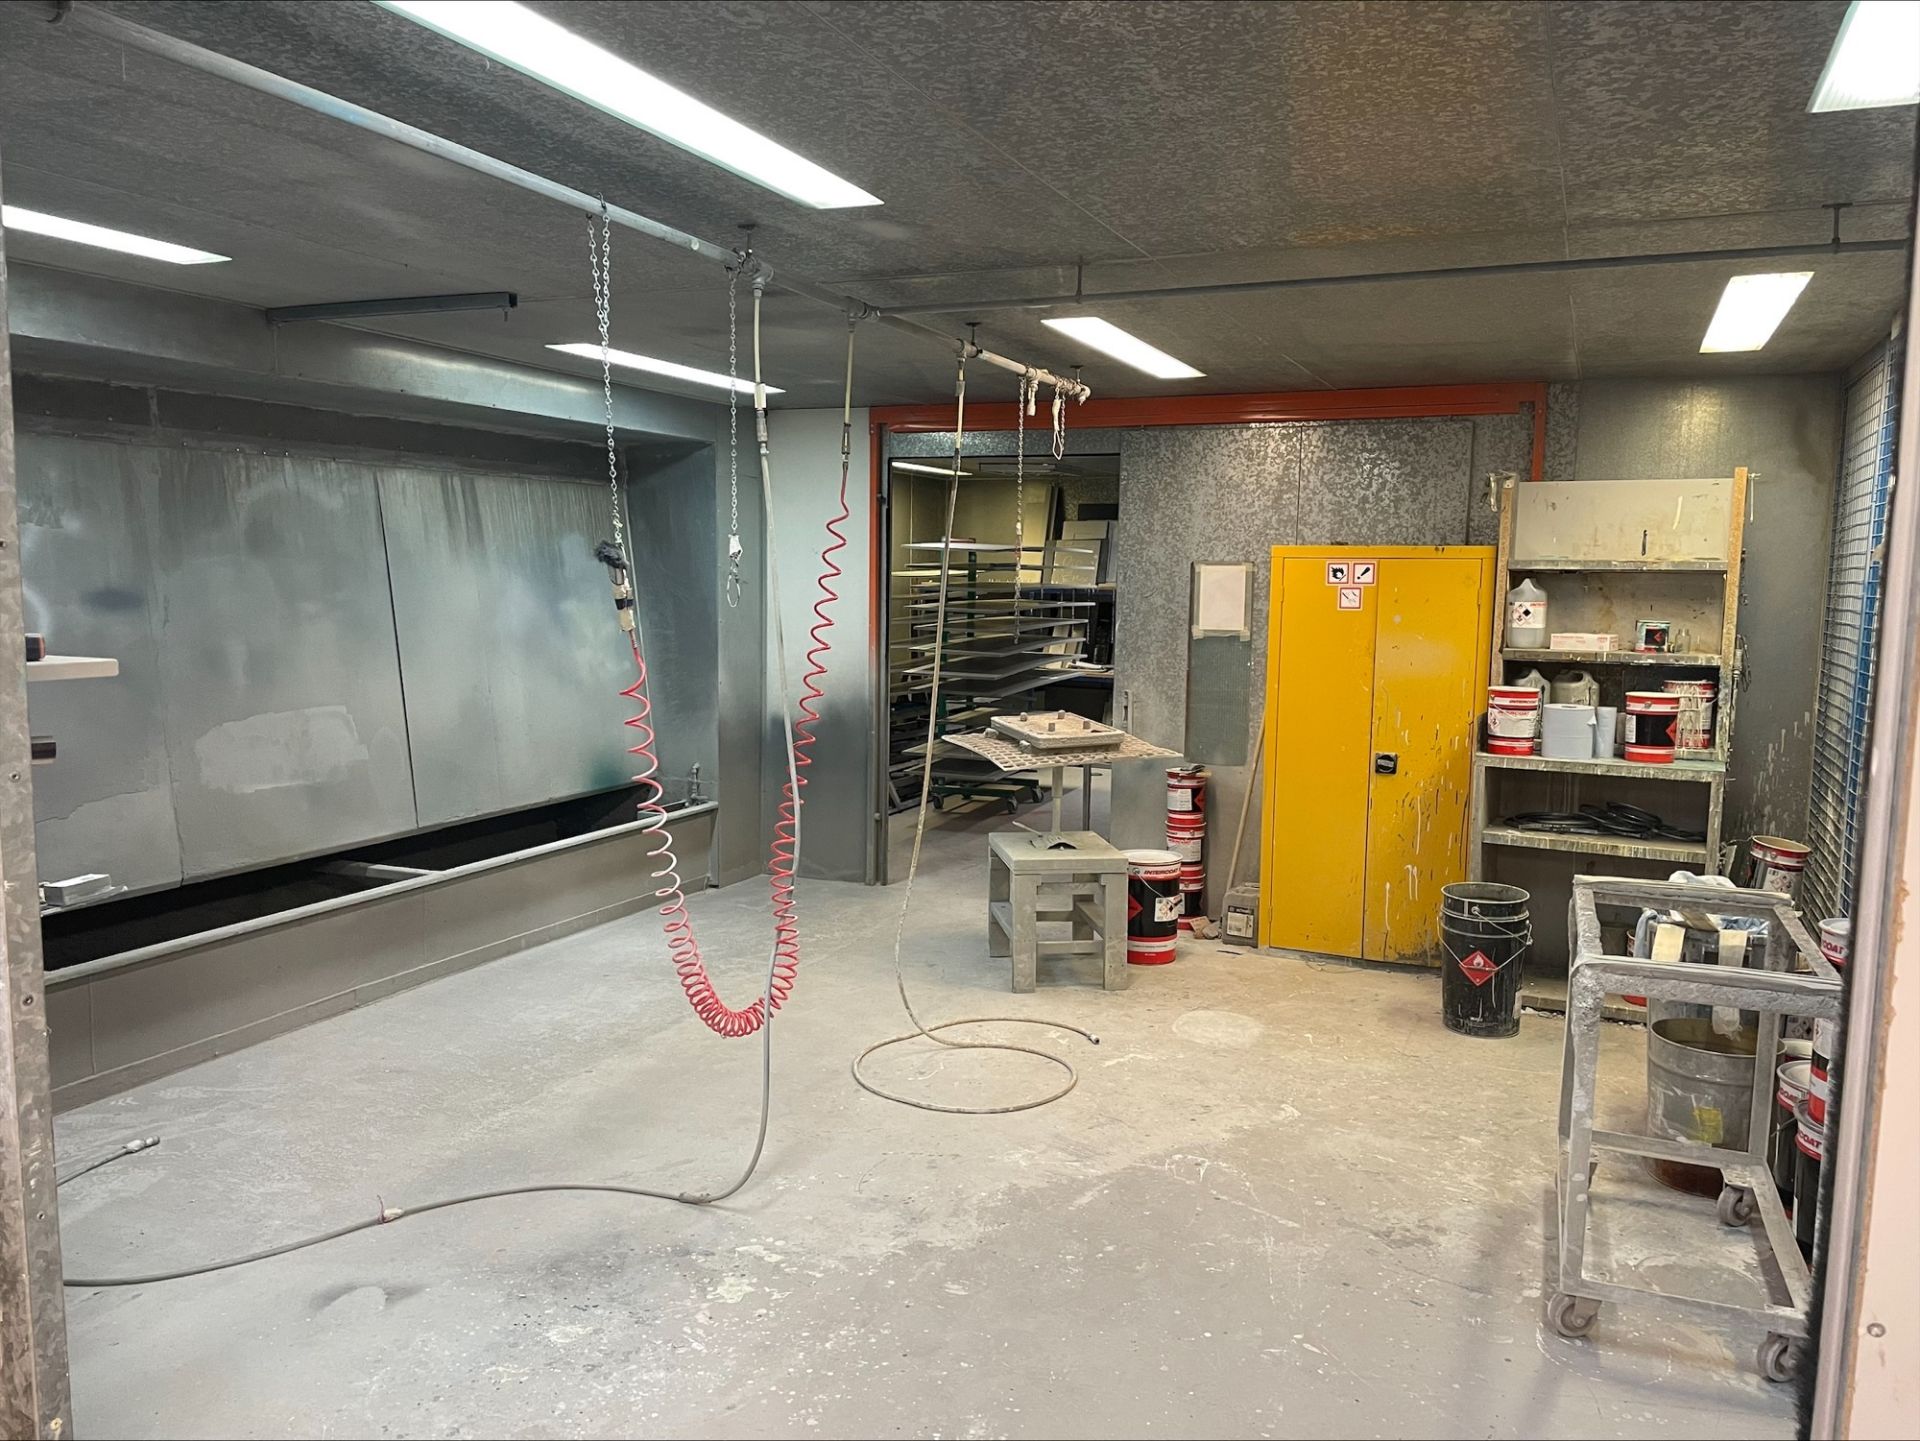 Schuberts Technical Services Limited Free standing/sectional 3 zone spray room and oven system - Image 7 of 10